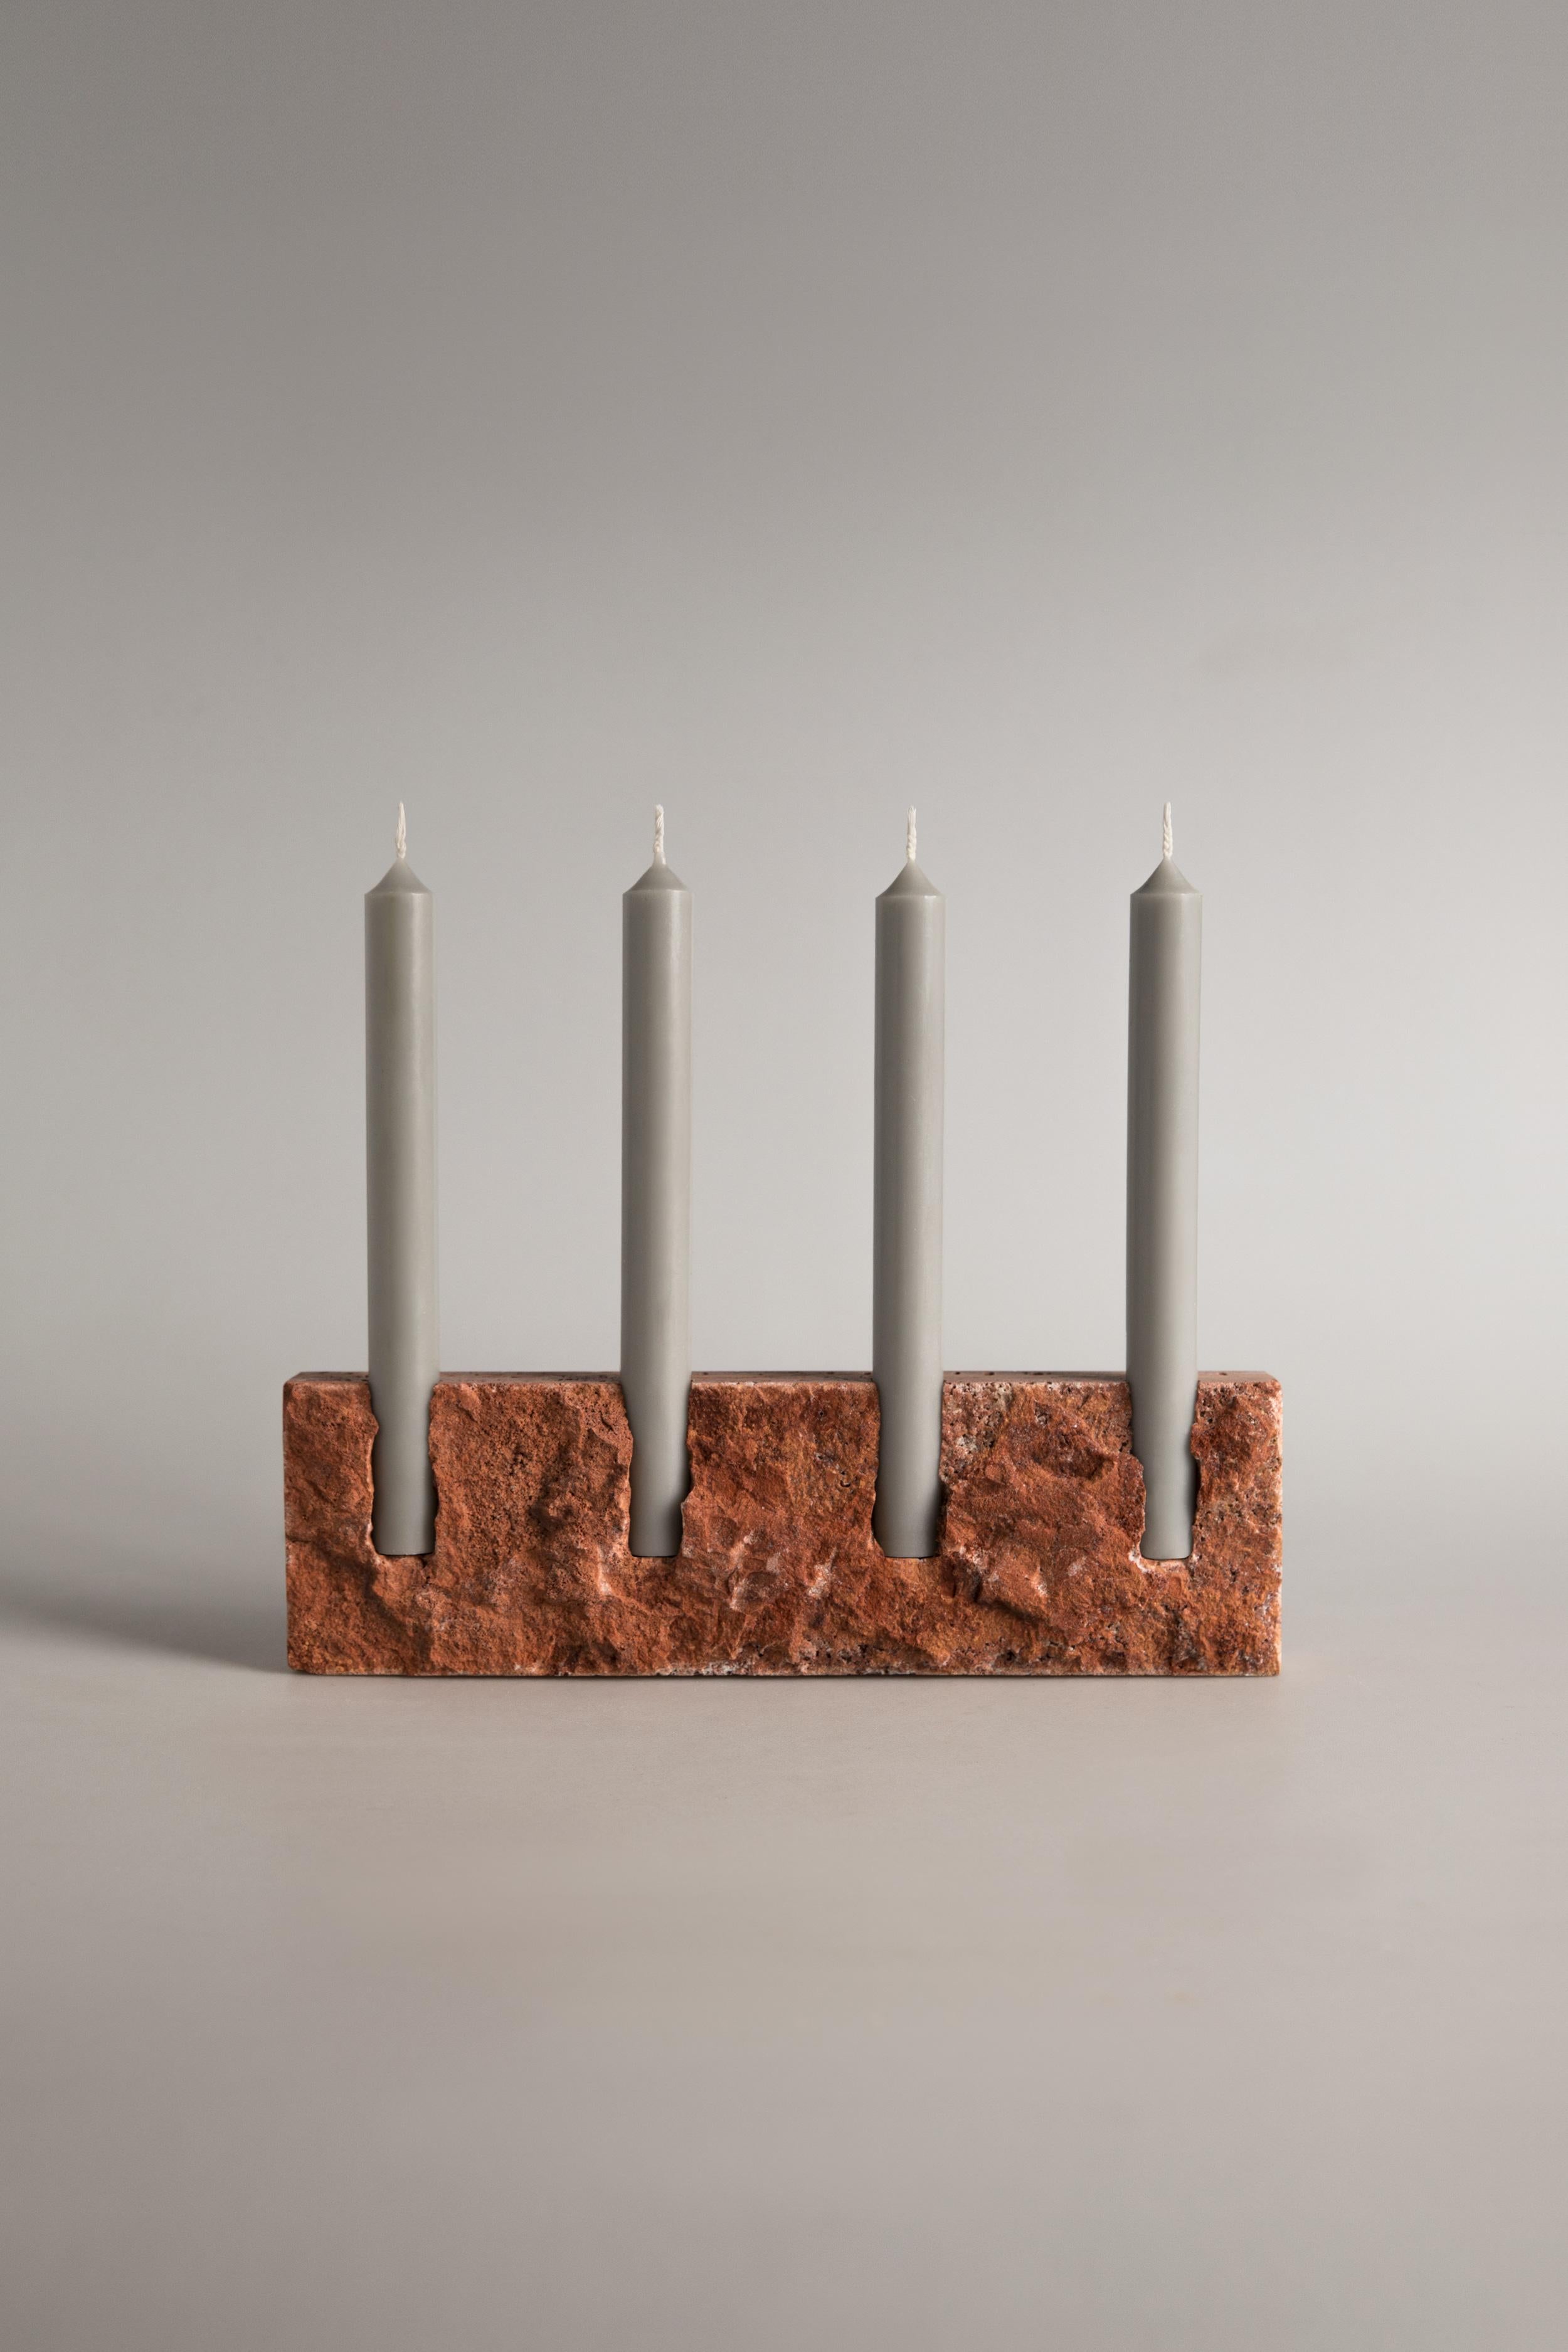 Handcrafted candle holder in Persian travertine with rock face front (hand chipped) and smooth sides. Please note that each stone is unique and reacts differently, therefore important variations in colour, shape and texture occur.

Snug candle